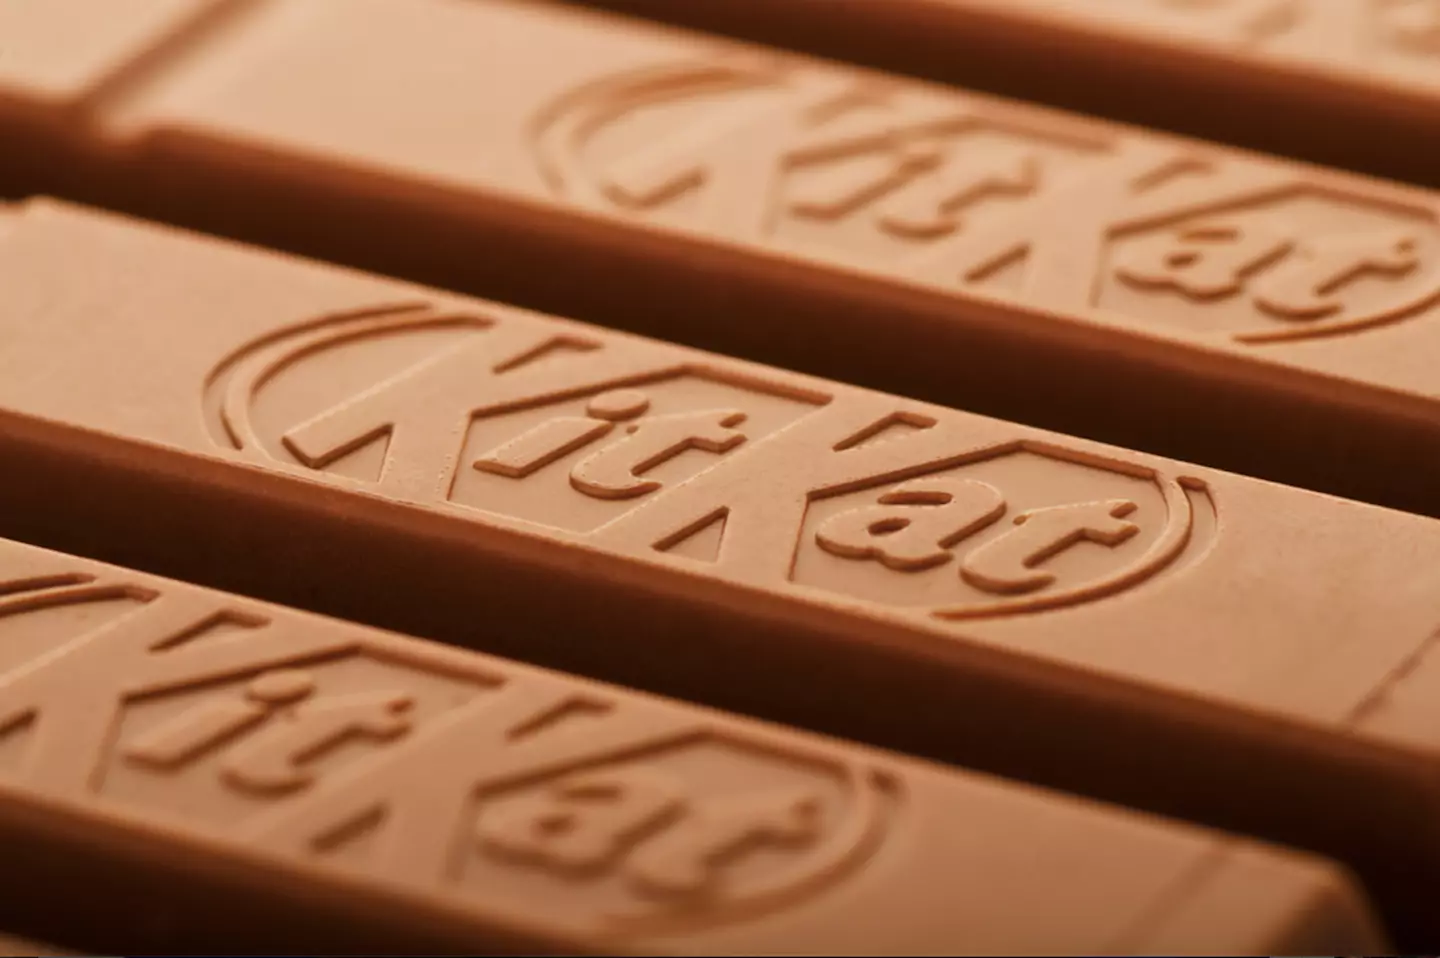 We can never say no to a KitKat (